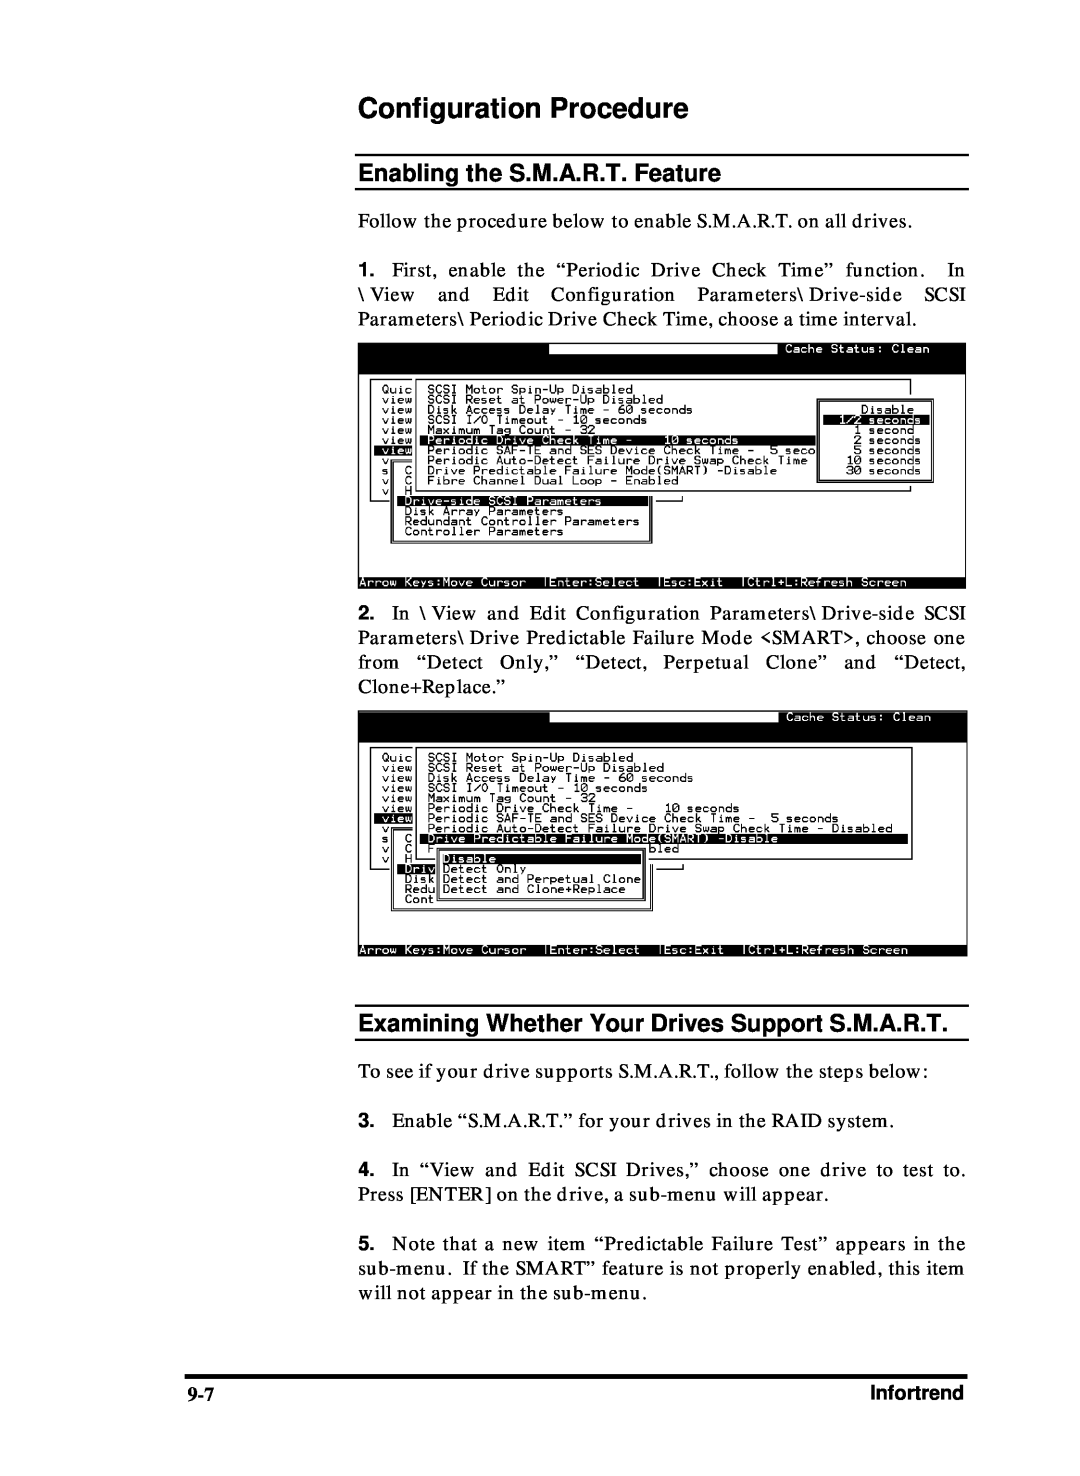 Compaq Infortrend manual Configuration Procedure, Enabling the S.M.A.R.T. Feature 